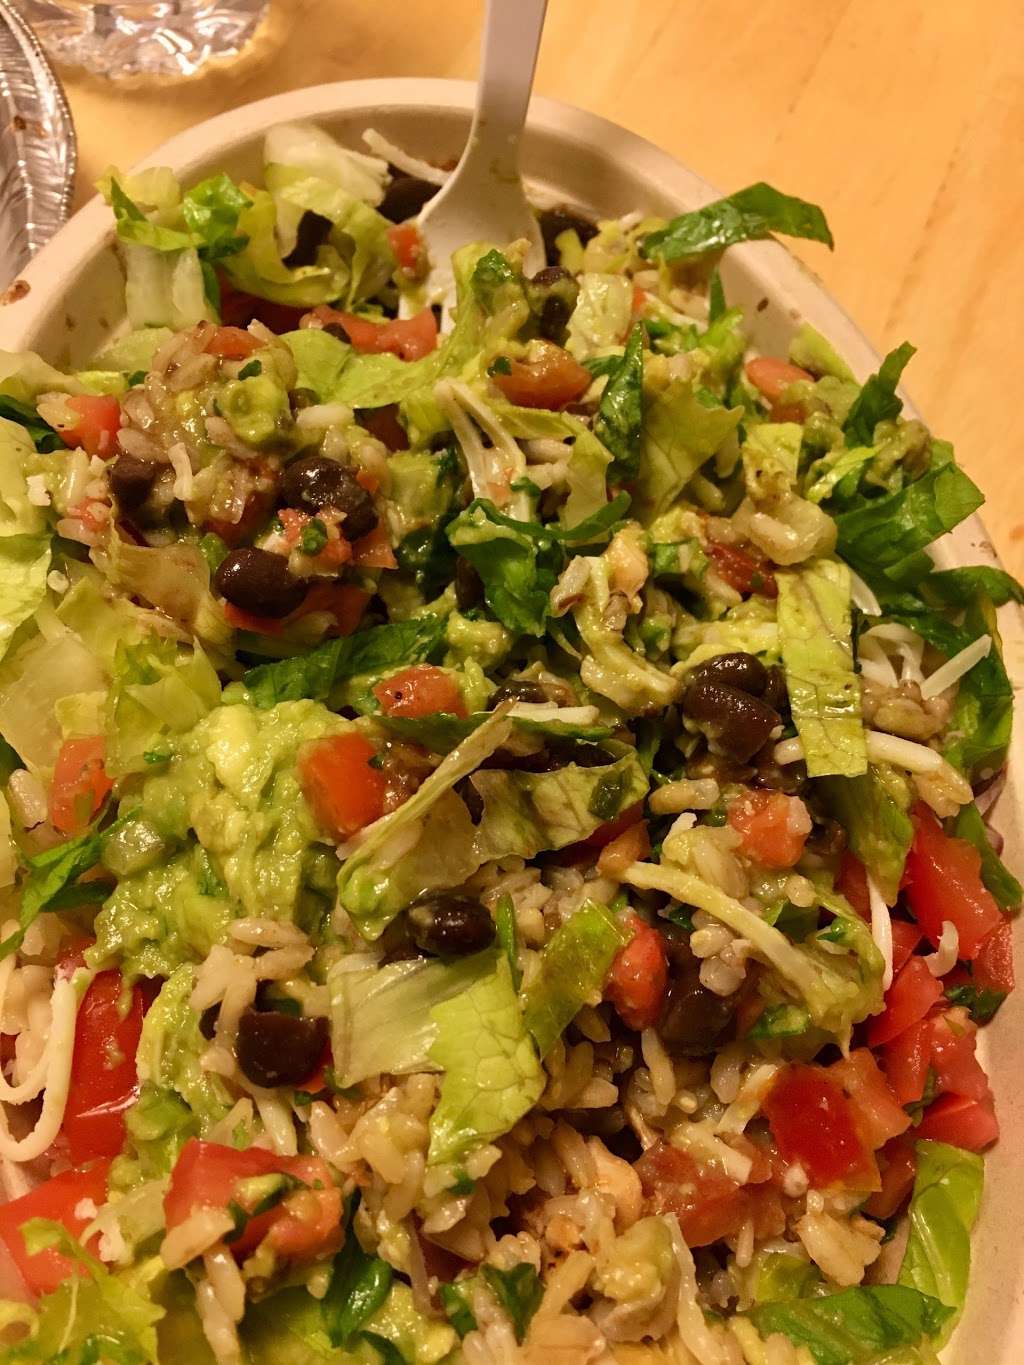 Chipotle Mexican Grill | 6325 Commerce Blvd, Rohnert Park, CA 94928 | Phone: (707) 536-0348